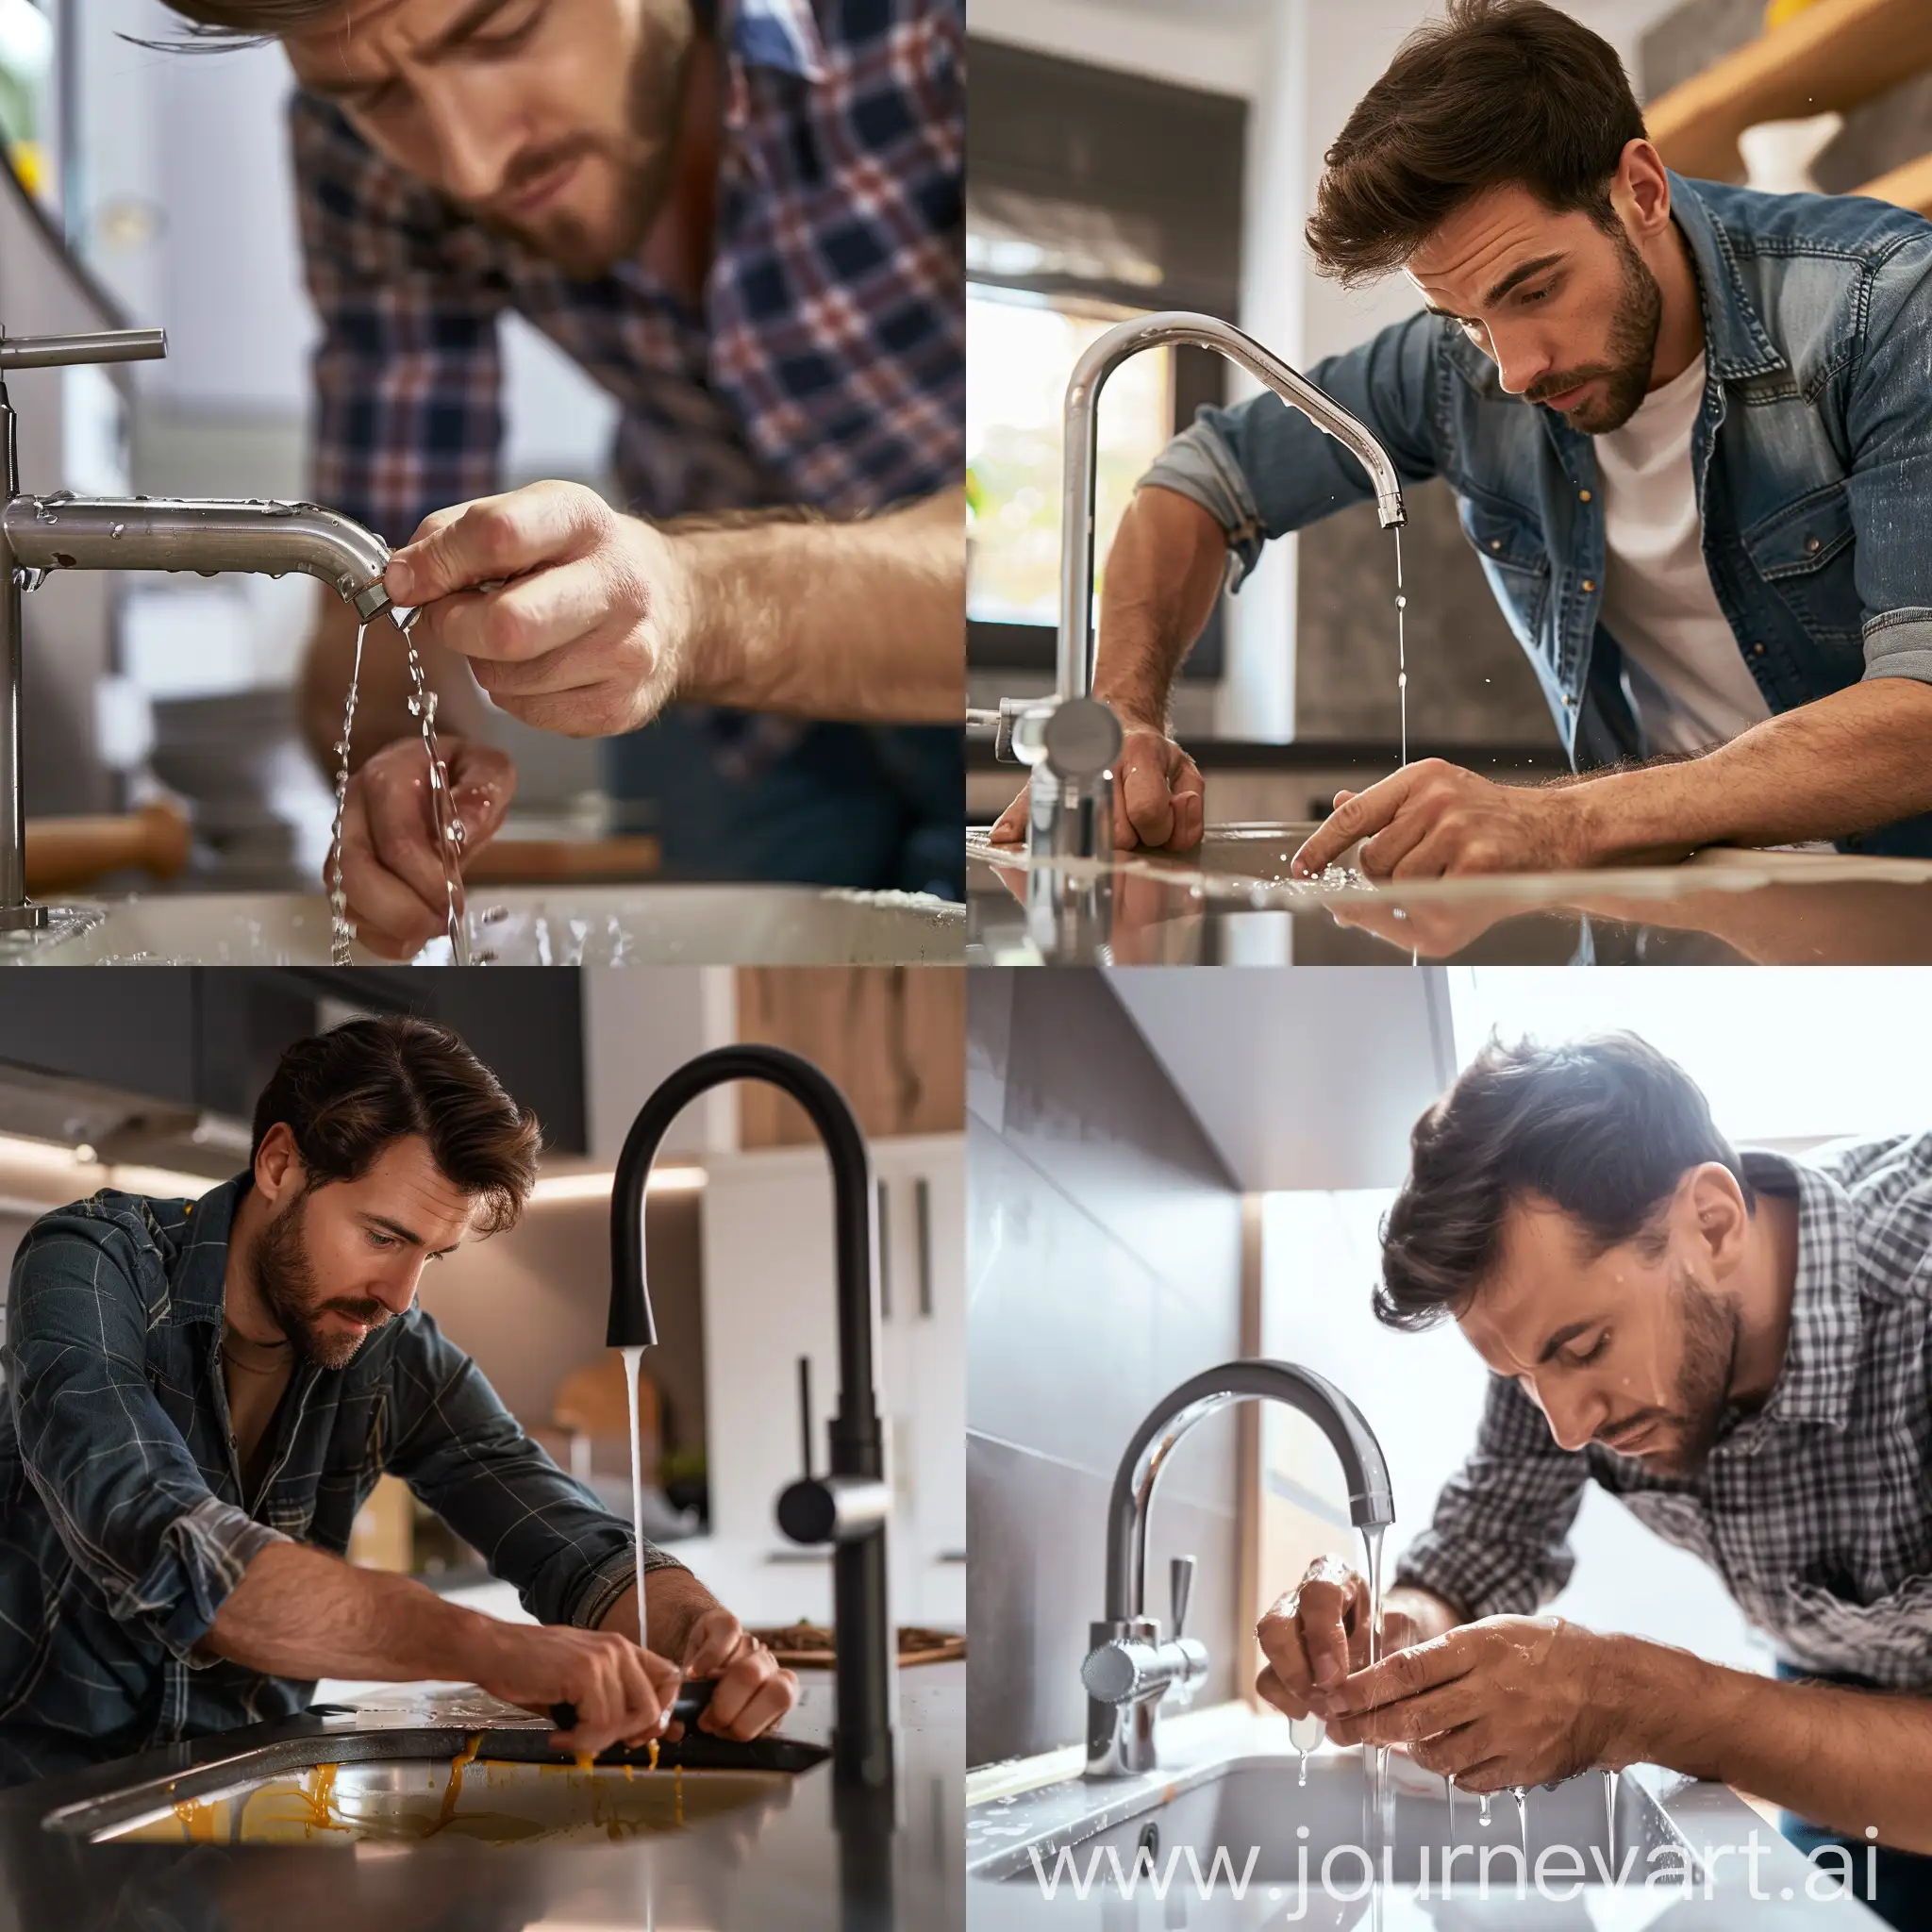 Man-Fixing-Leaking-Sink-in-Home-Kitchen